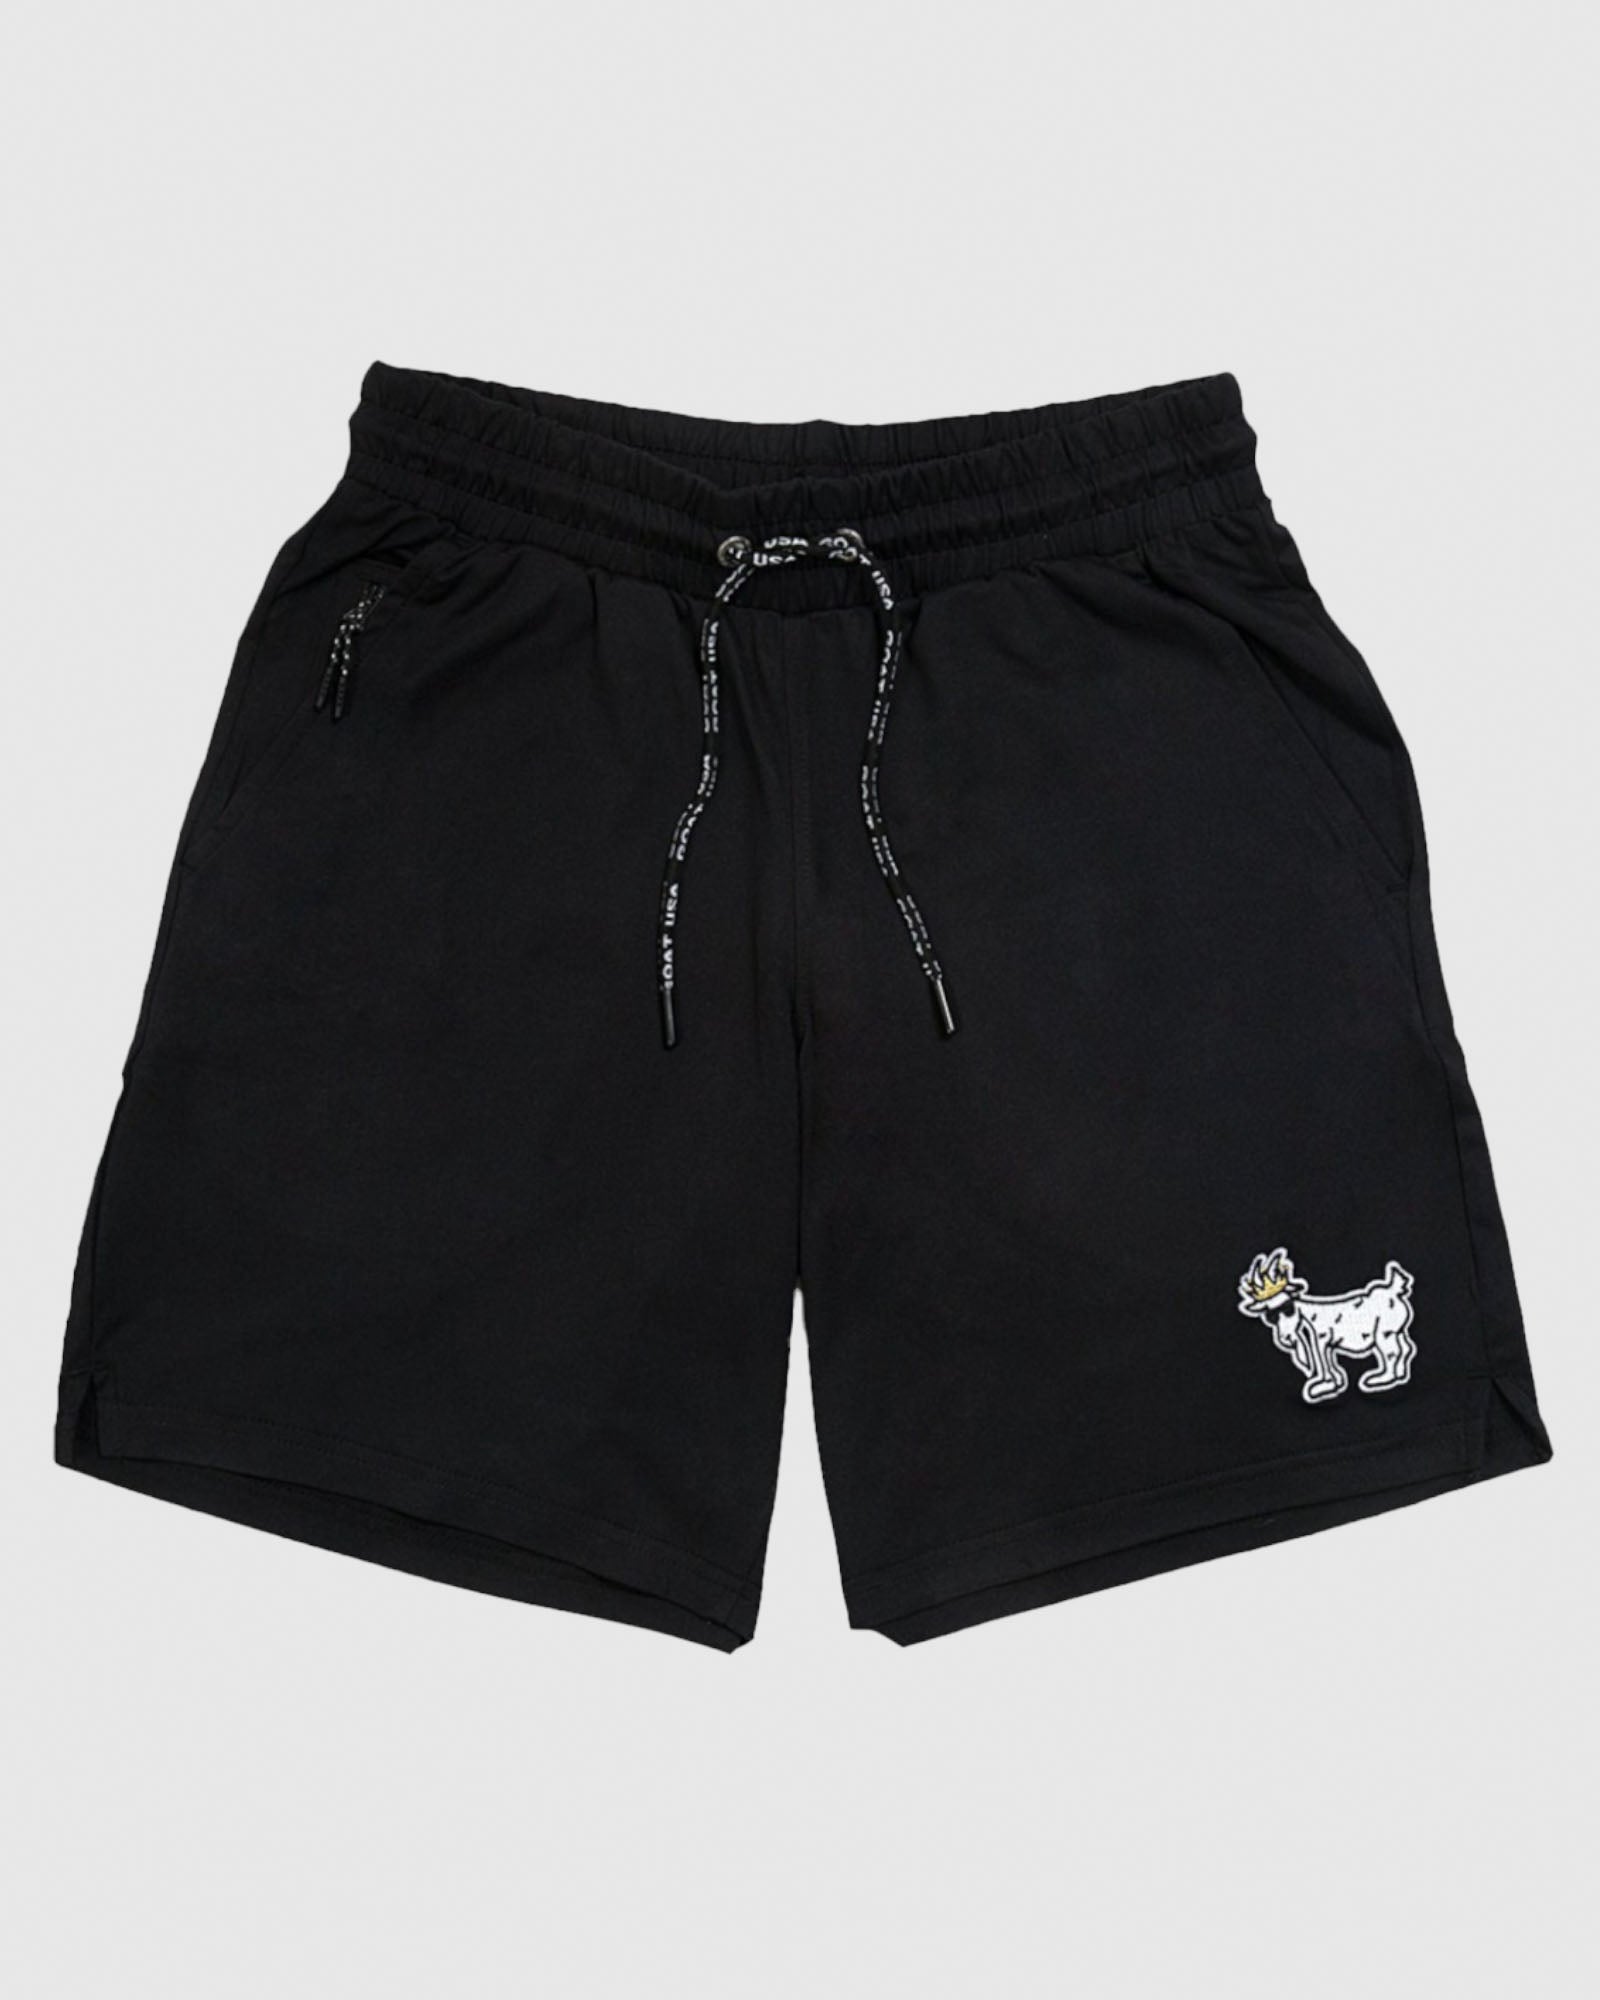 Goat USA Boys' Relaxed Knit Shorts